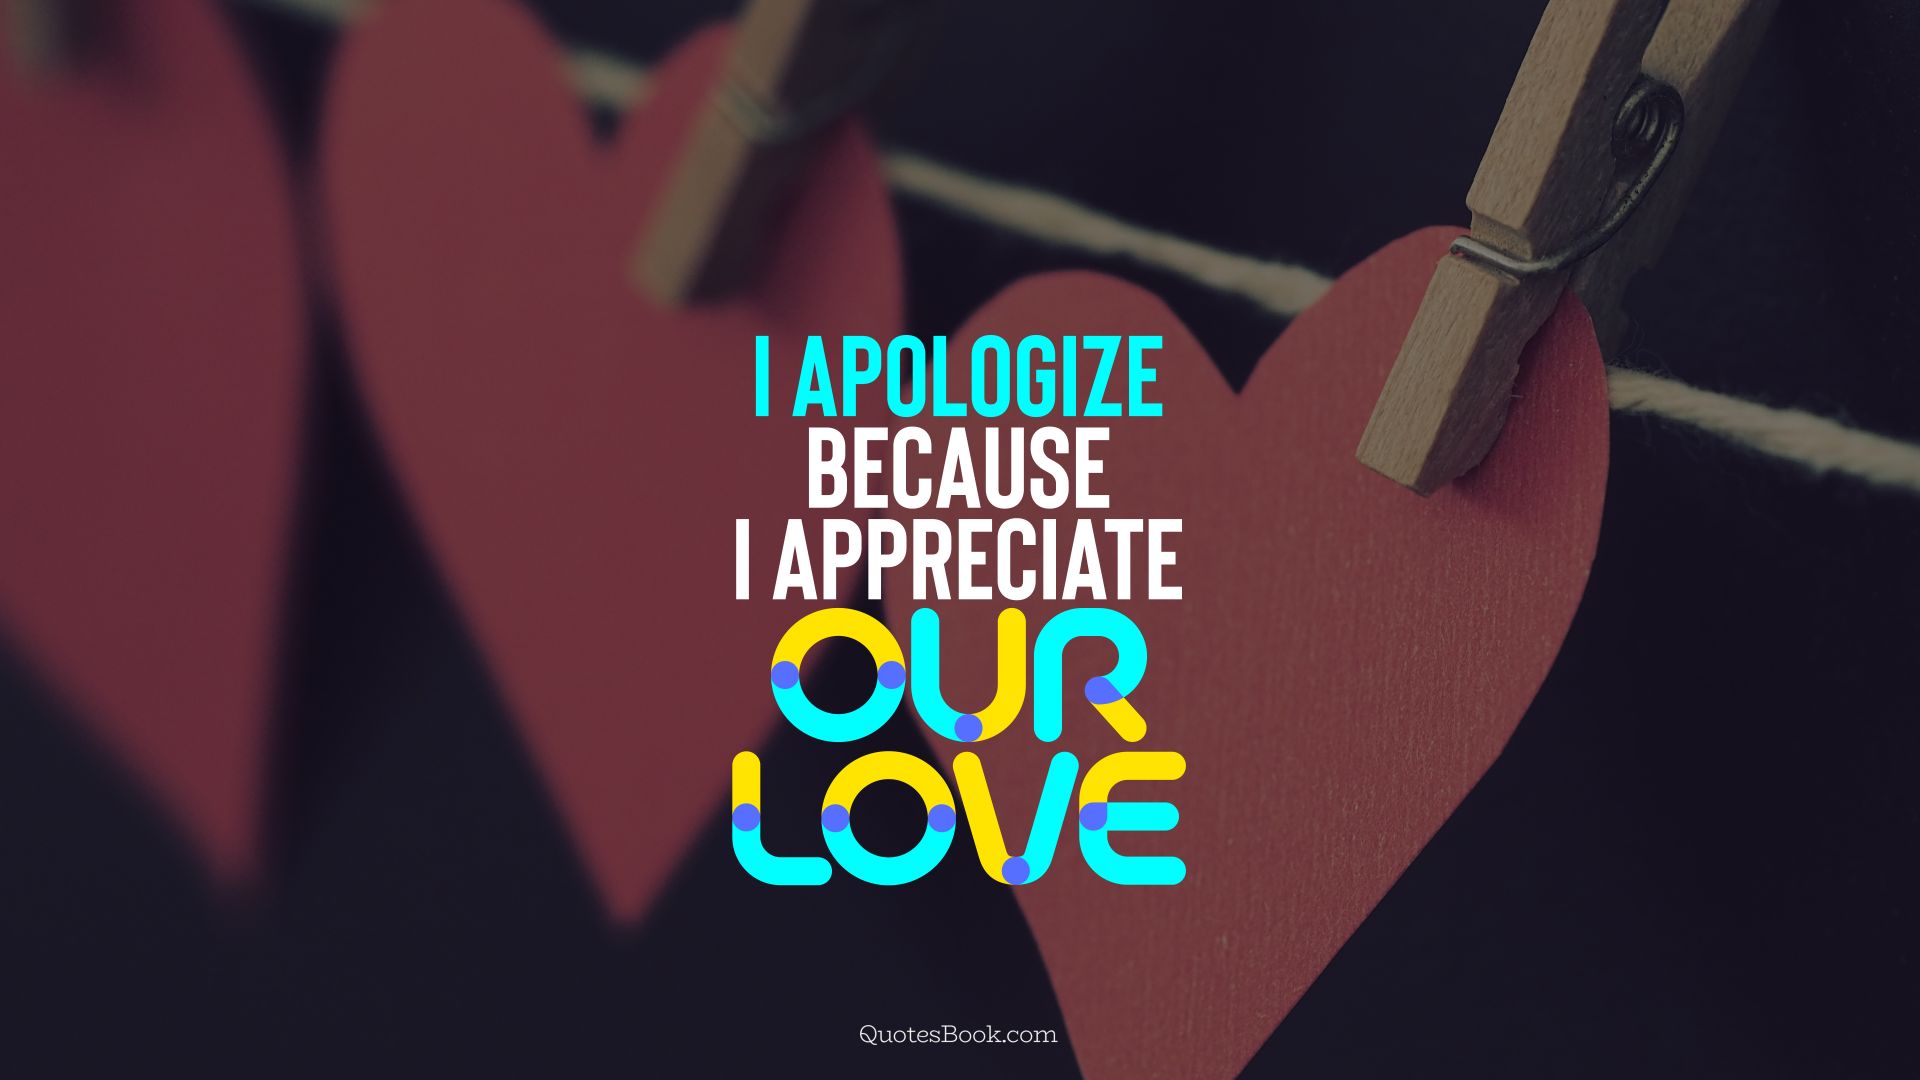 I apologize because I appreciate our love. - Quote by QuotesBook